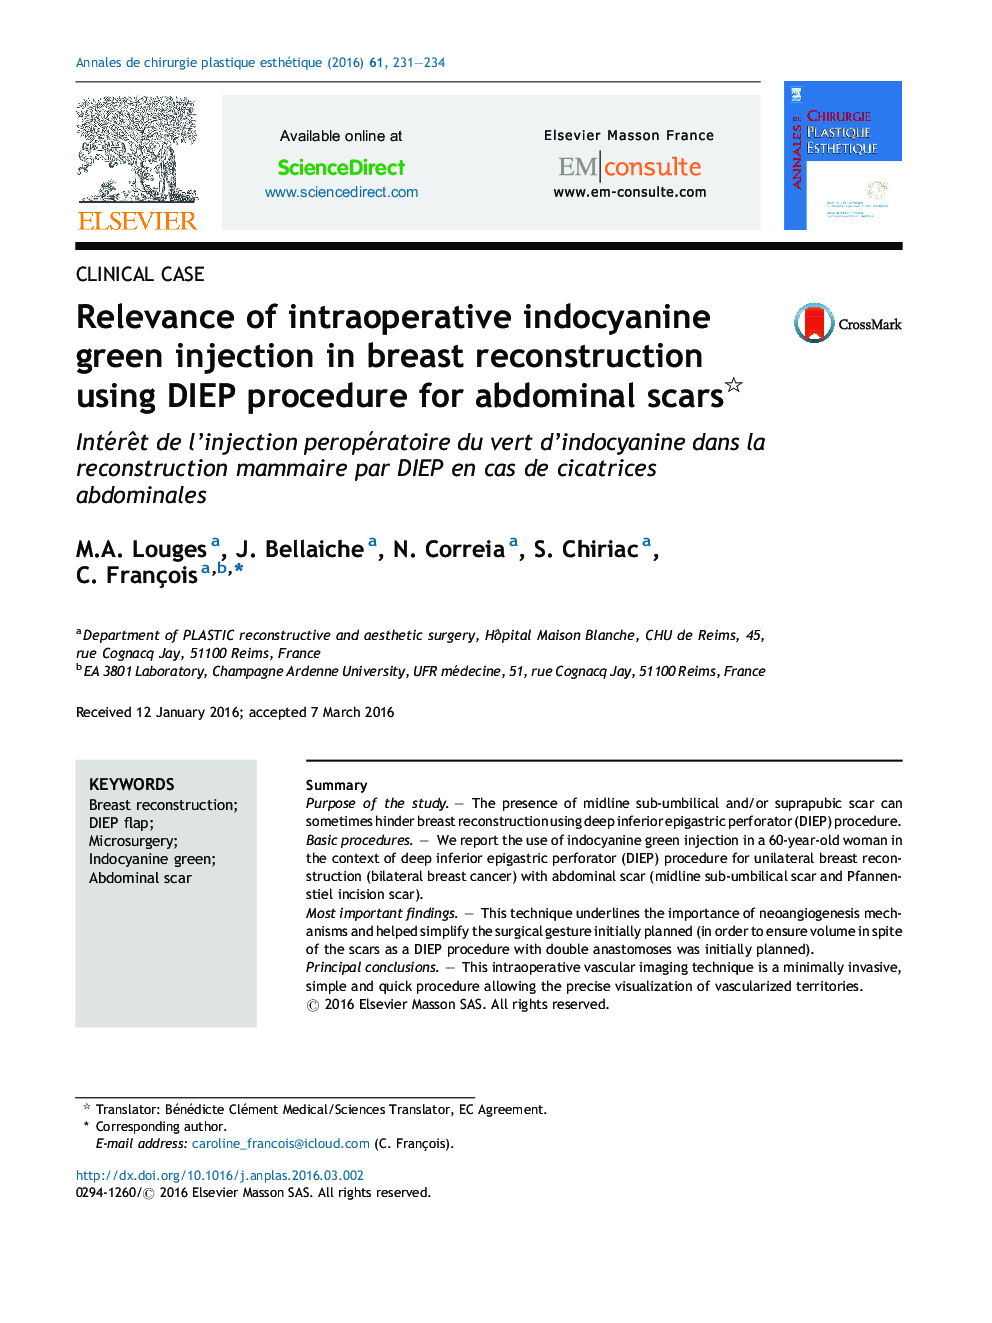 Relevance of intraoperative indocyanine green injection in breast reconstruction using DIEP procedure for abdominal scars 